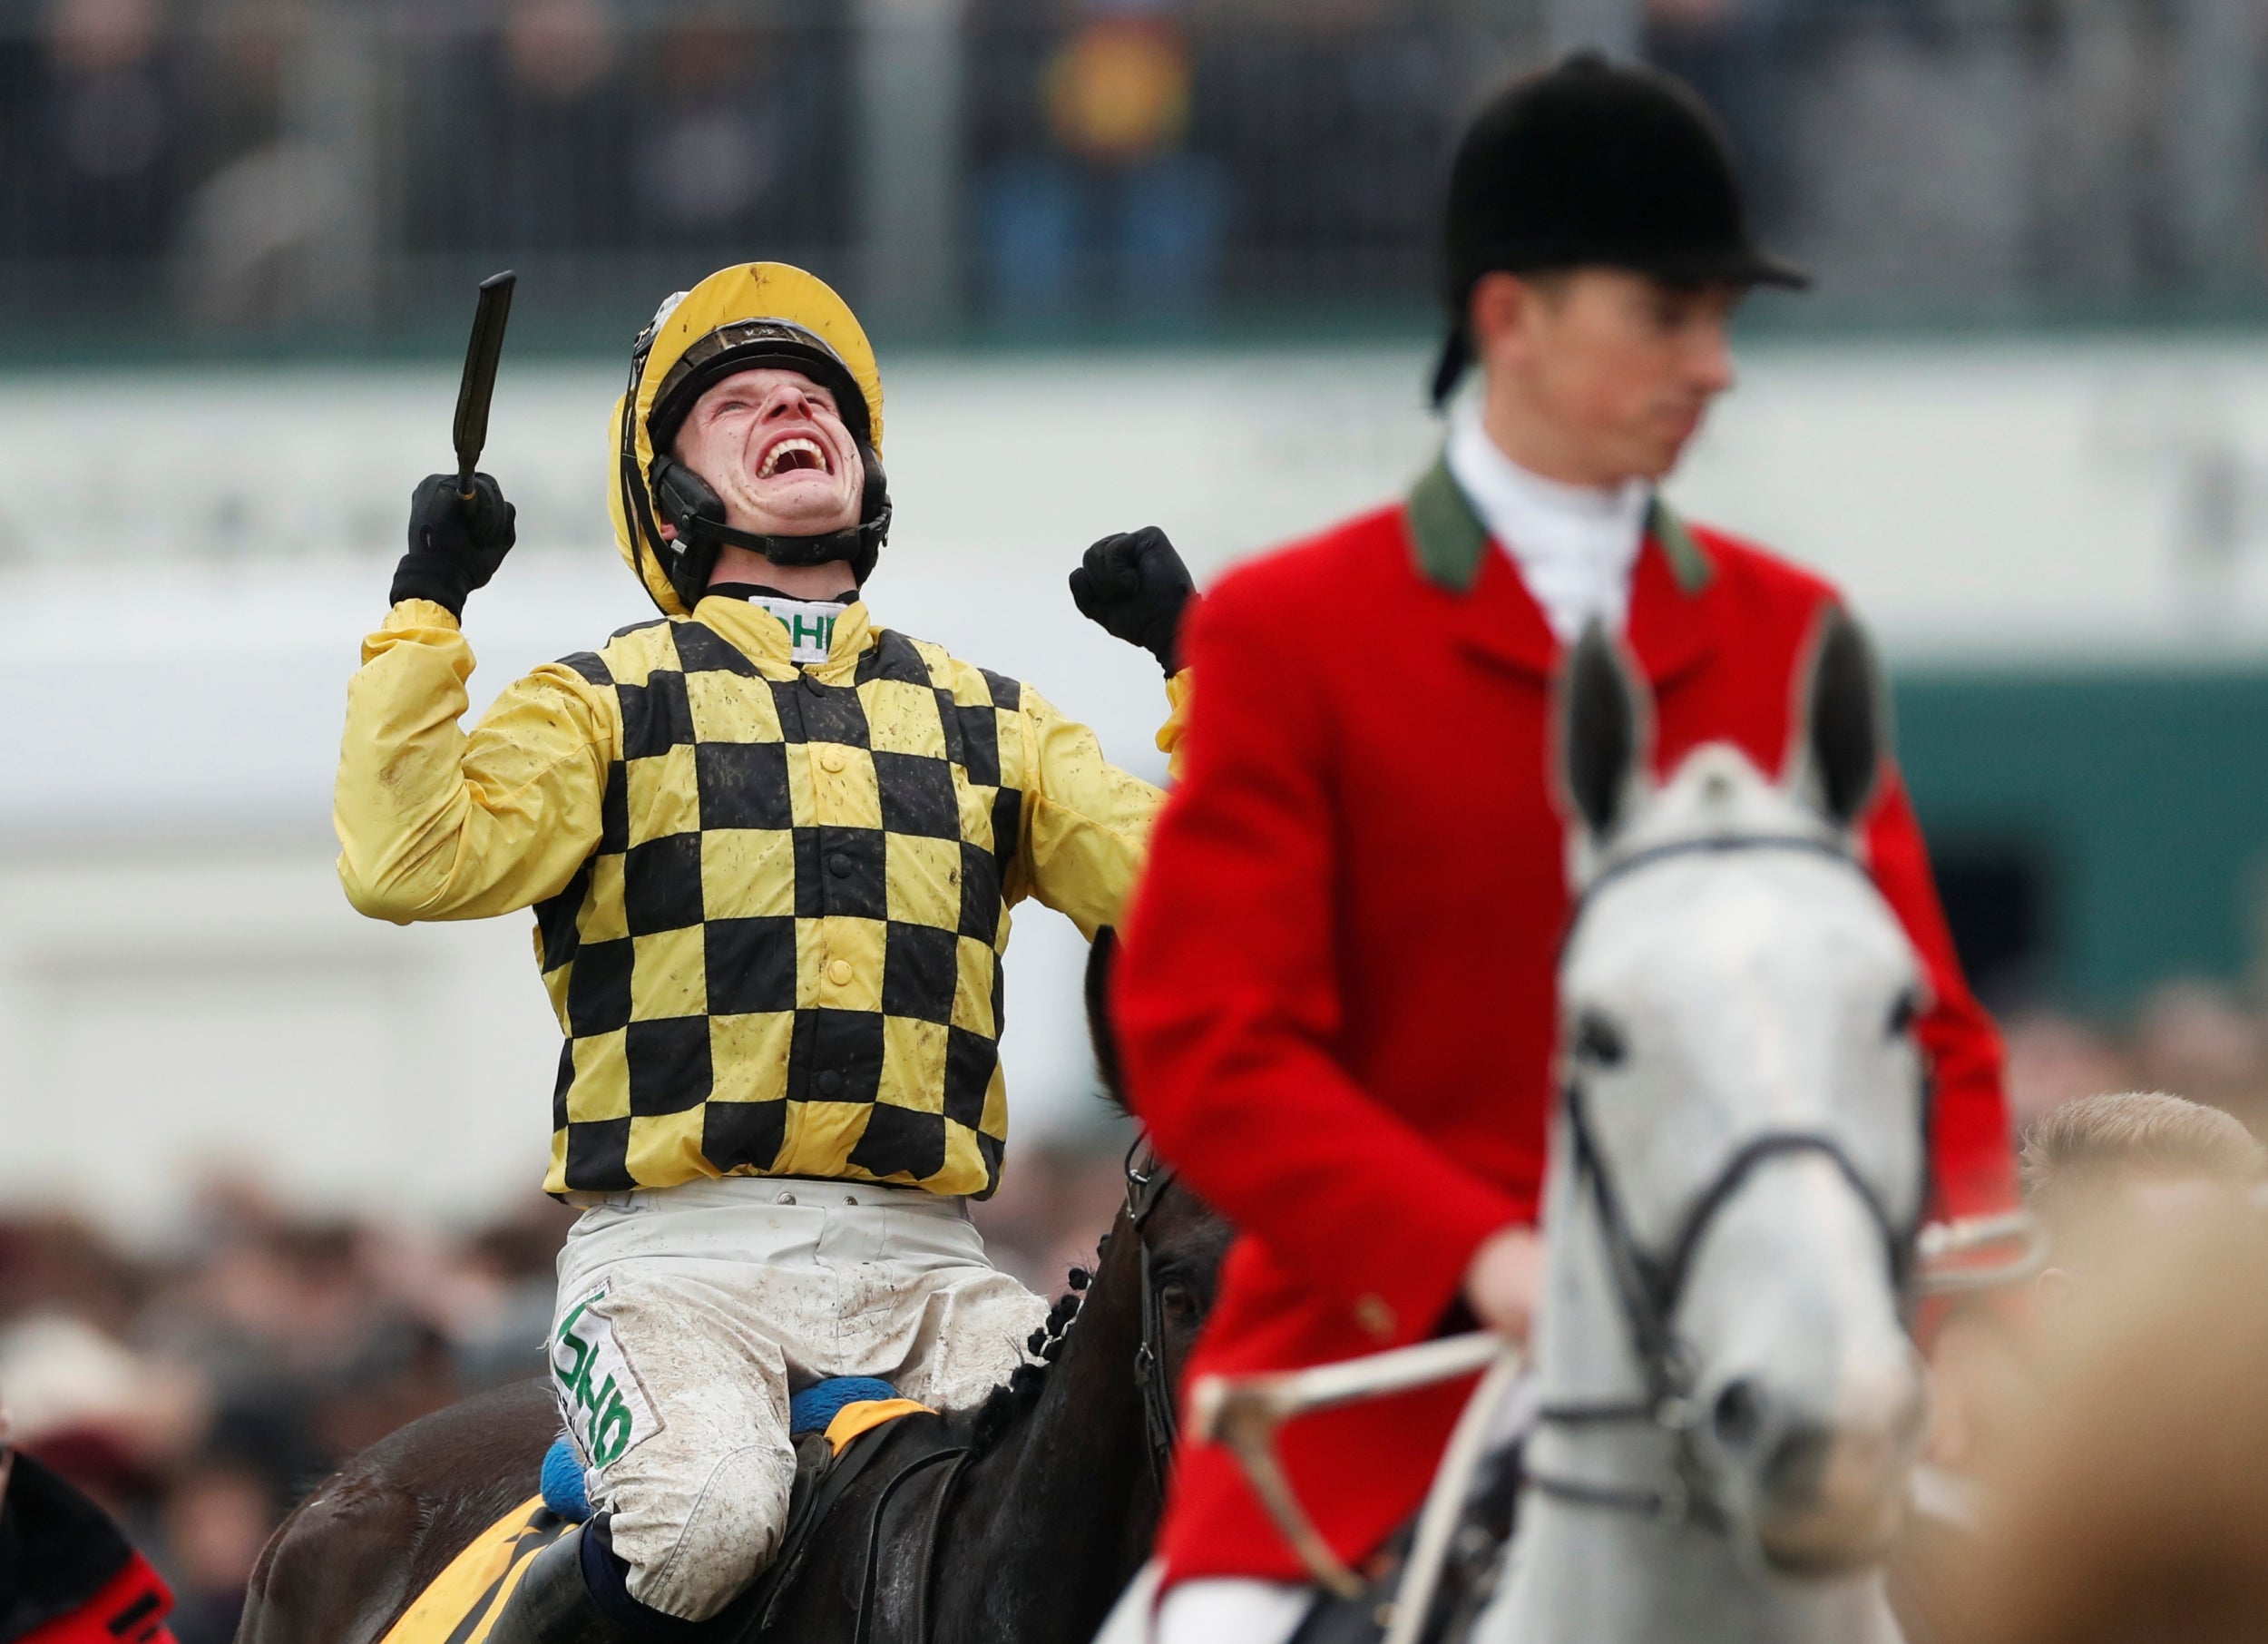 Paul Townend paid tribute to Willie Mullins (Action Images via Reuters)